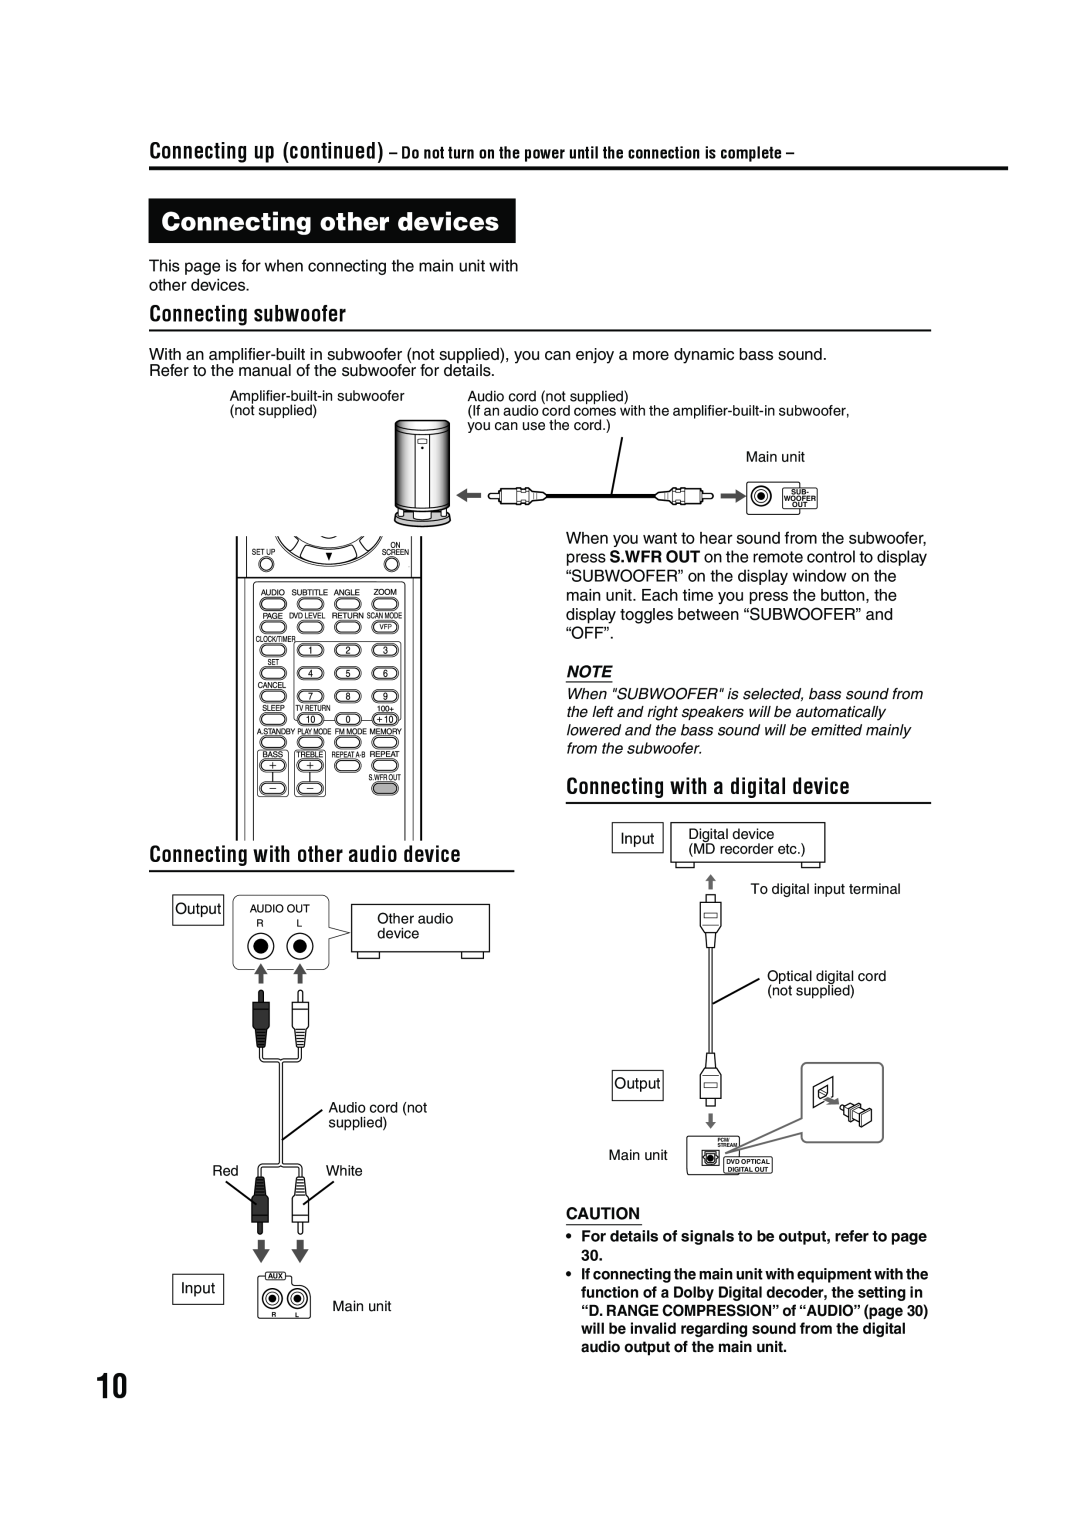 JVC GVT0142-001A manual Connecting other devices, Connecting subwoofer, Connecting with a digital device, Connection 